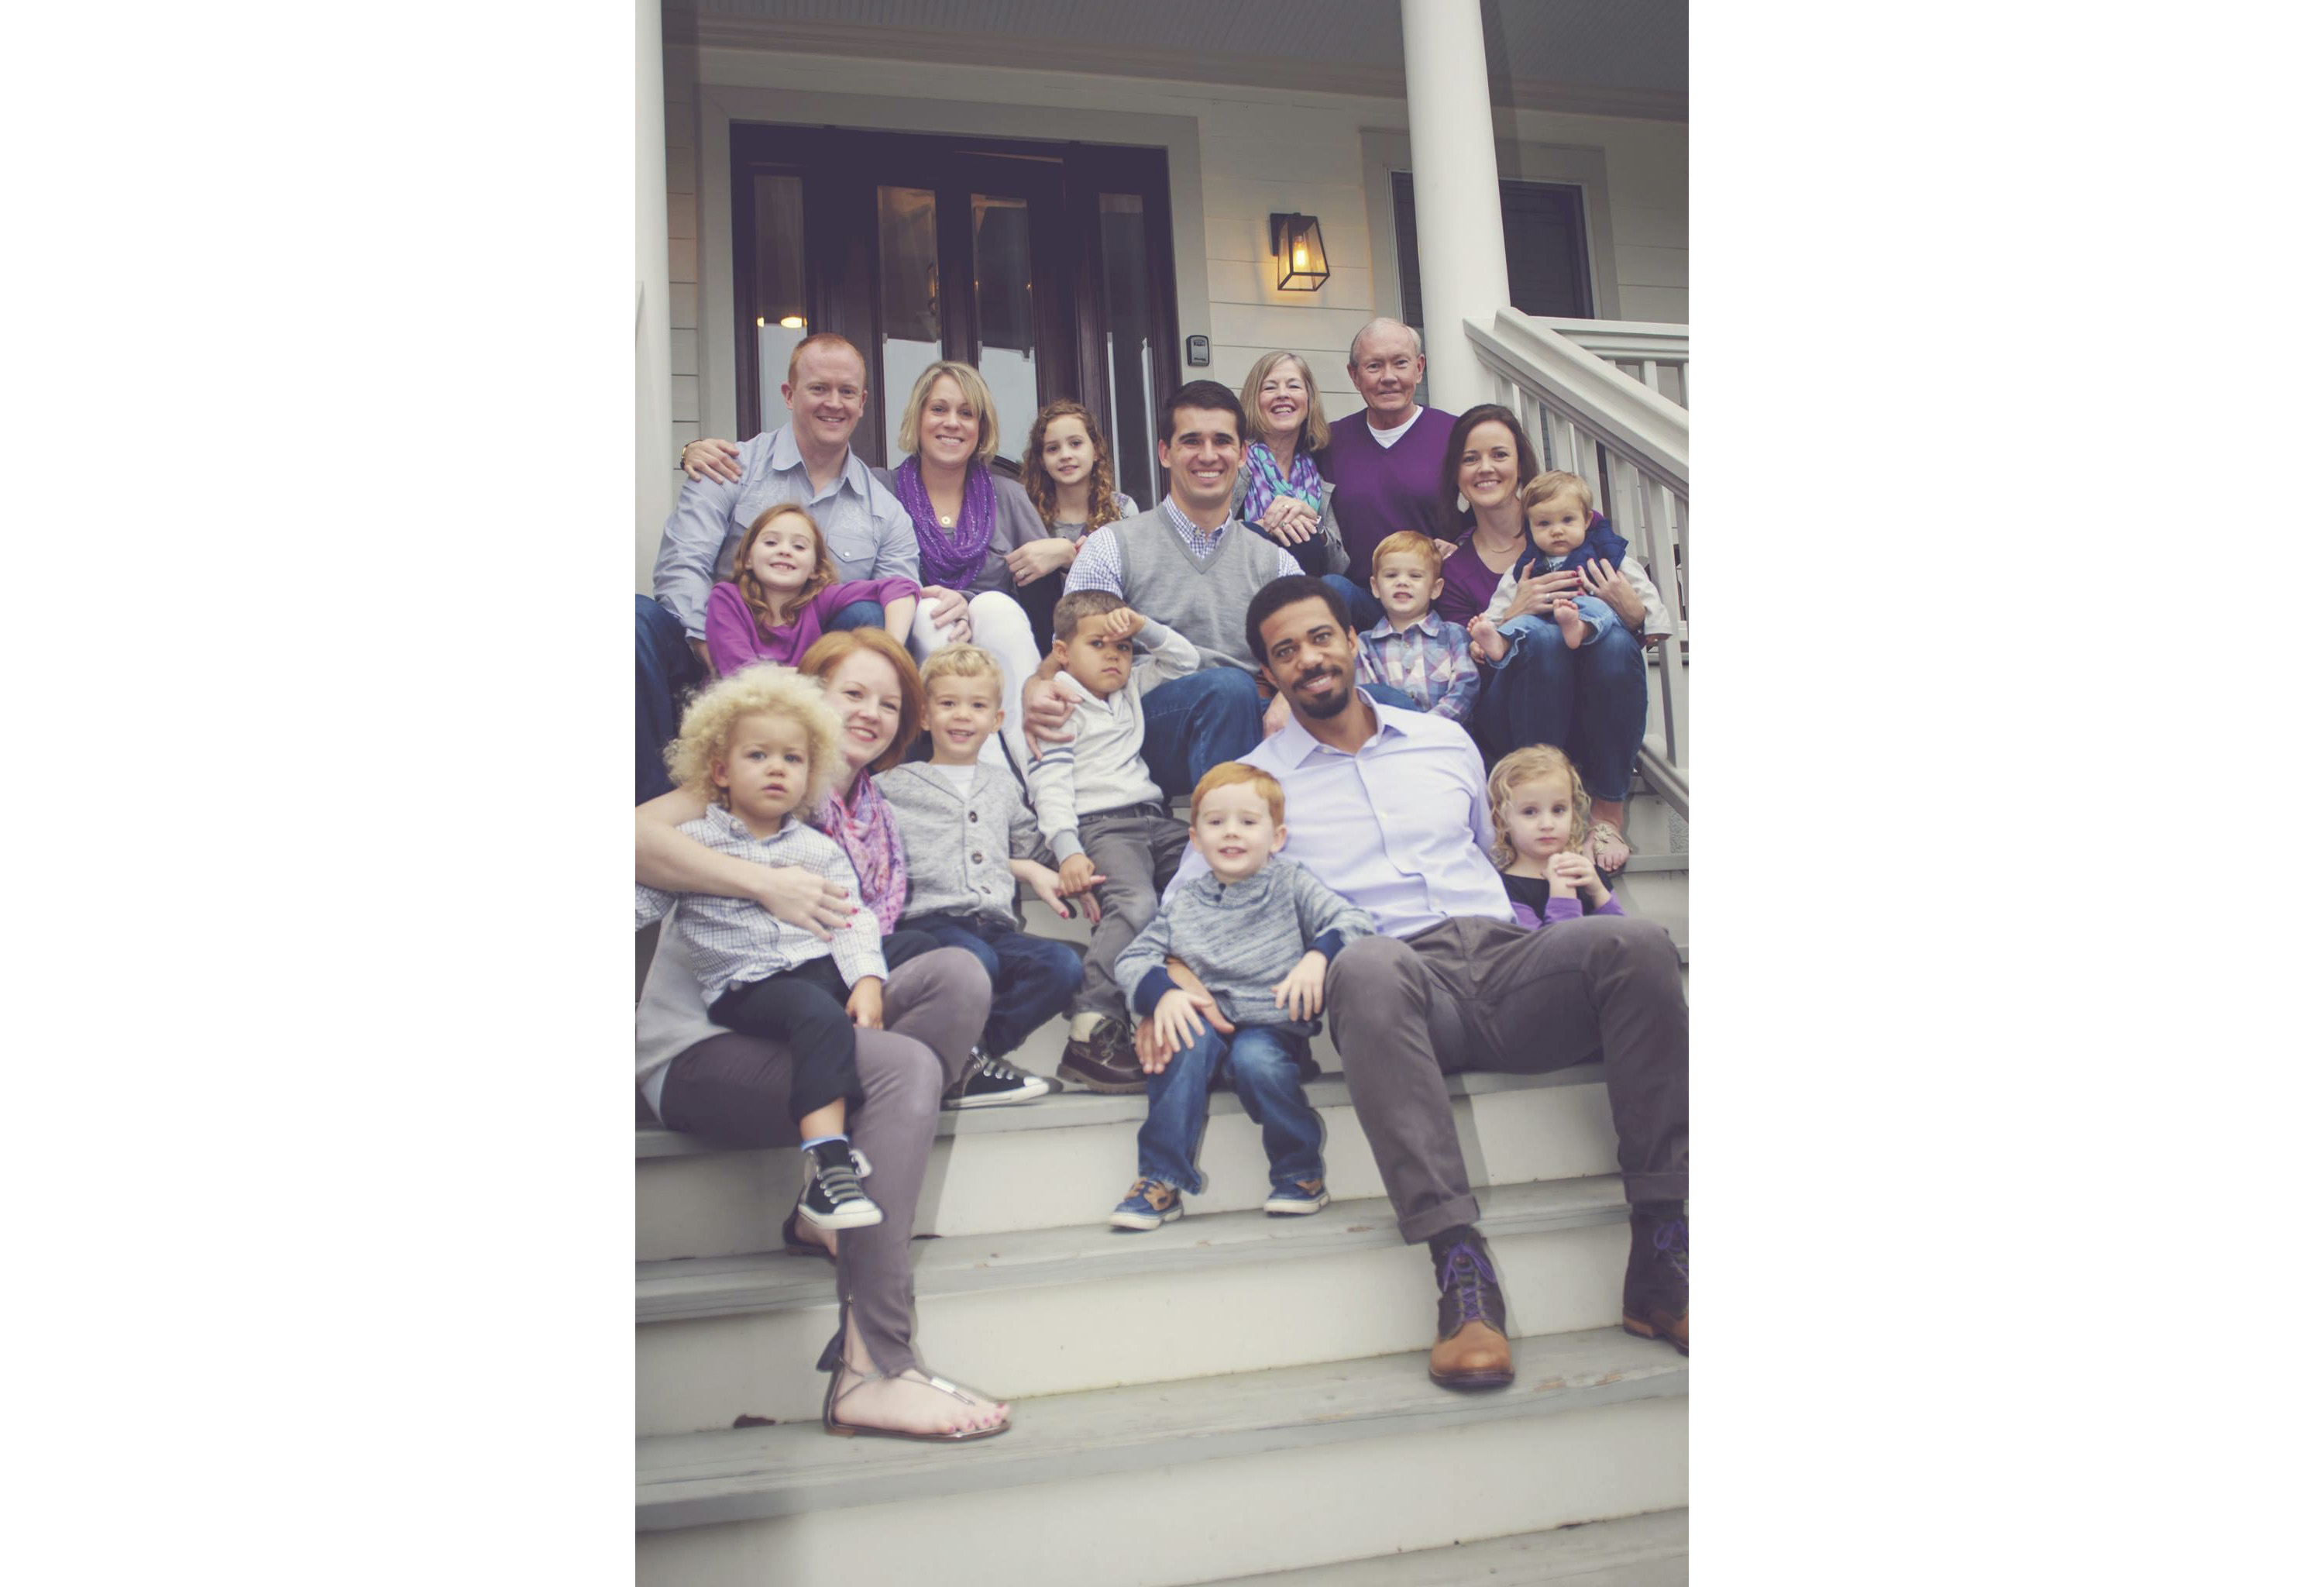 Dempsey and his wife Deanie (top right) at home with their family.­